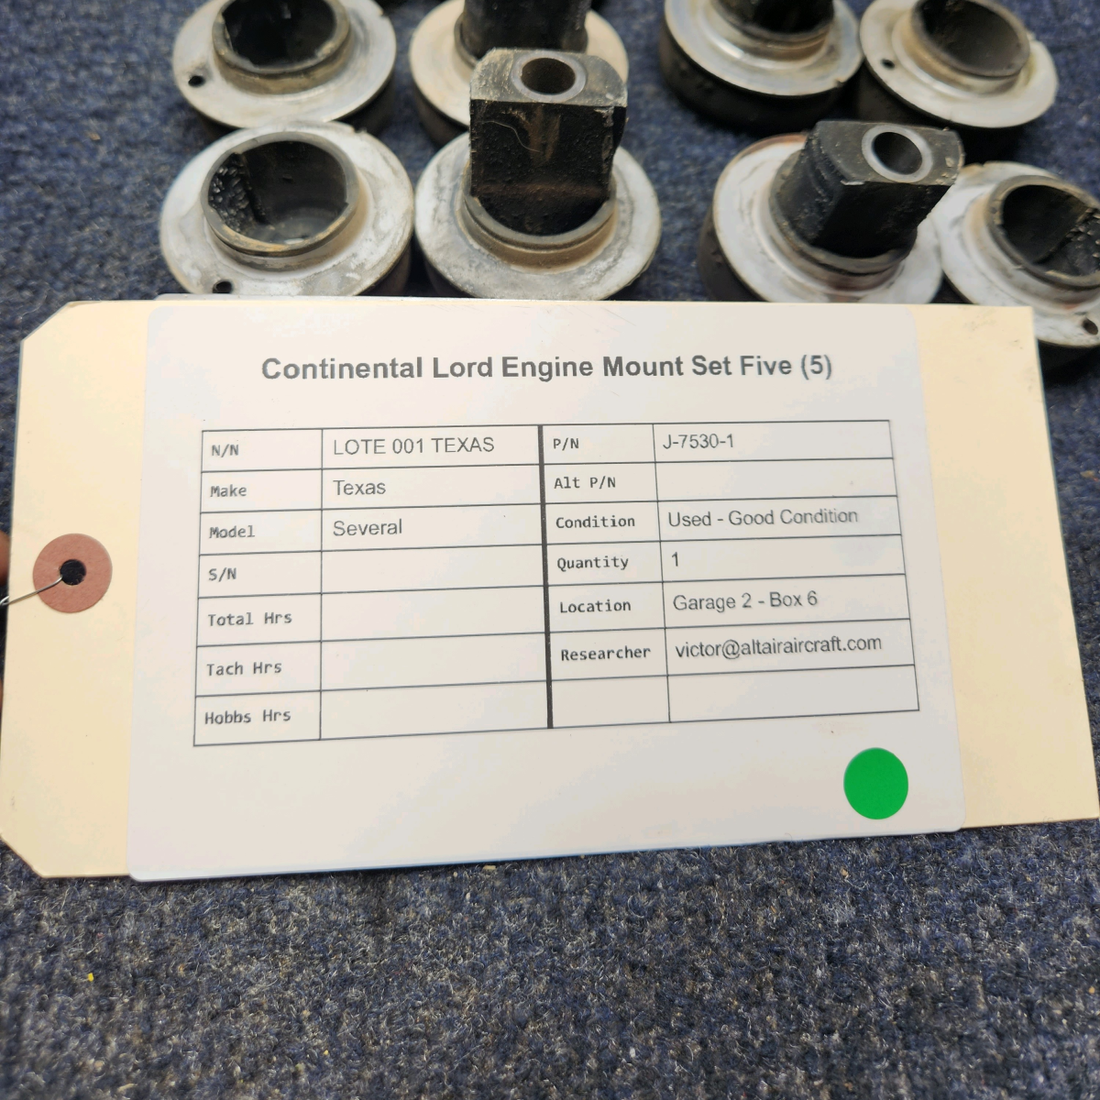 Used aircraft parts for sale, J-7530-1 Continental Texas Several CONTINENTAL LORD ENGINE MOUNT SET FIVE (5)